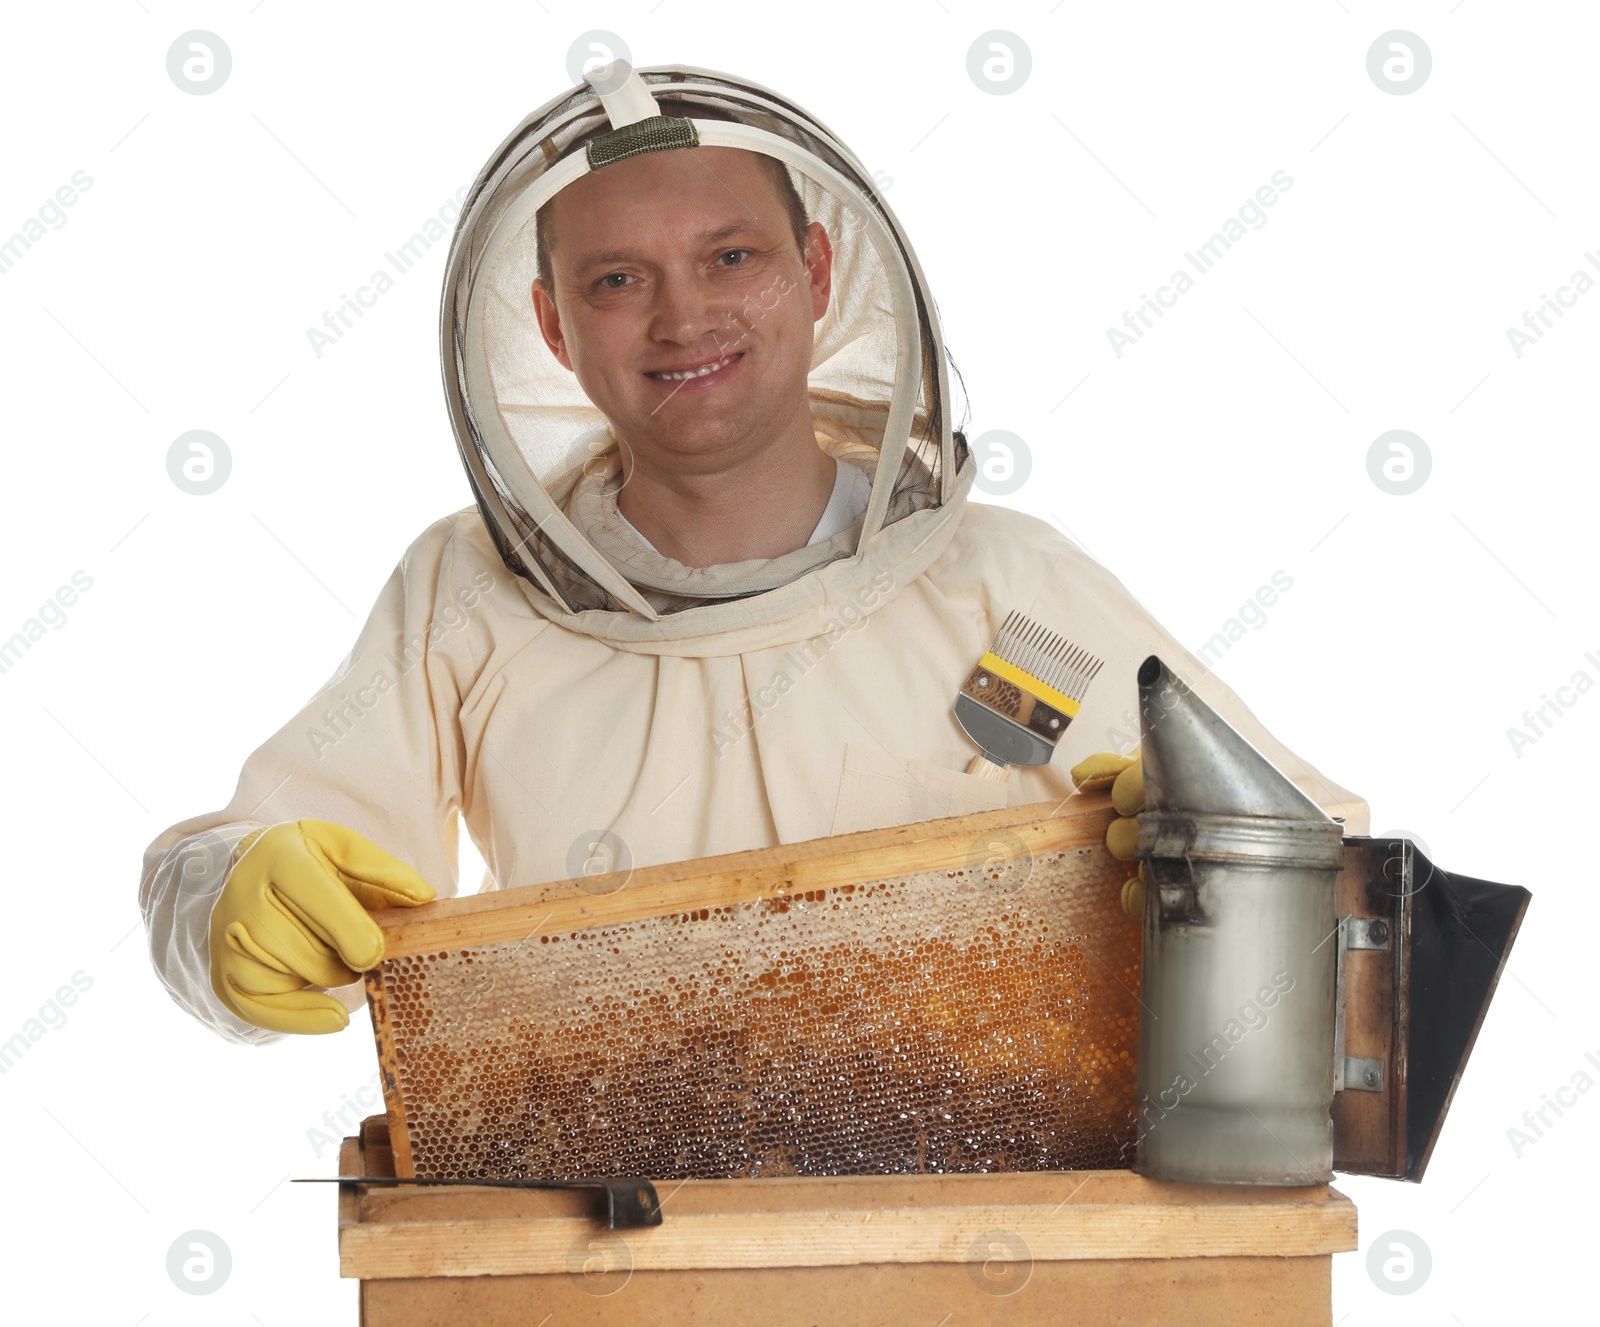 Photo of Beekeeper in uniform taking frame with honeycomb out of wooden hive on white background